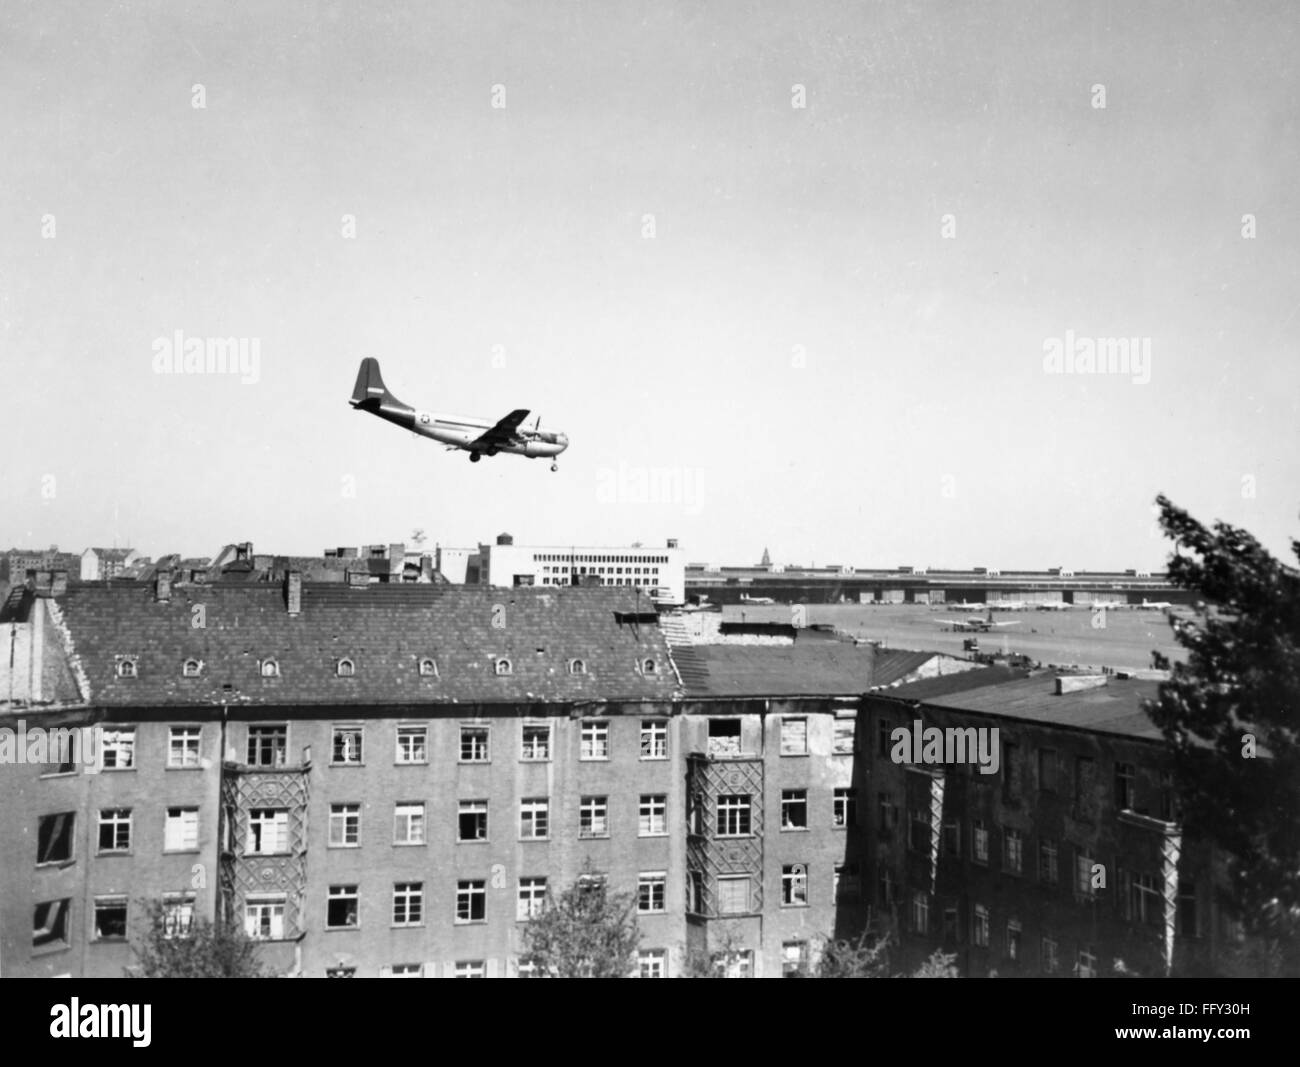 BERLIN AIRLIFT, 1949. /nA U.S. Air Force C-97 Stratofreighter approaching Tempelhof airport in Berlin, 4 May 1949. Stock Photo